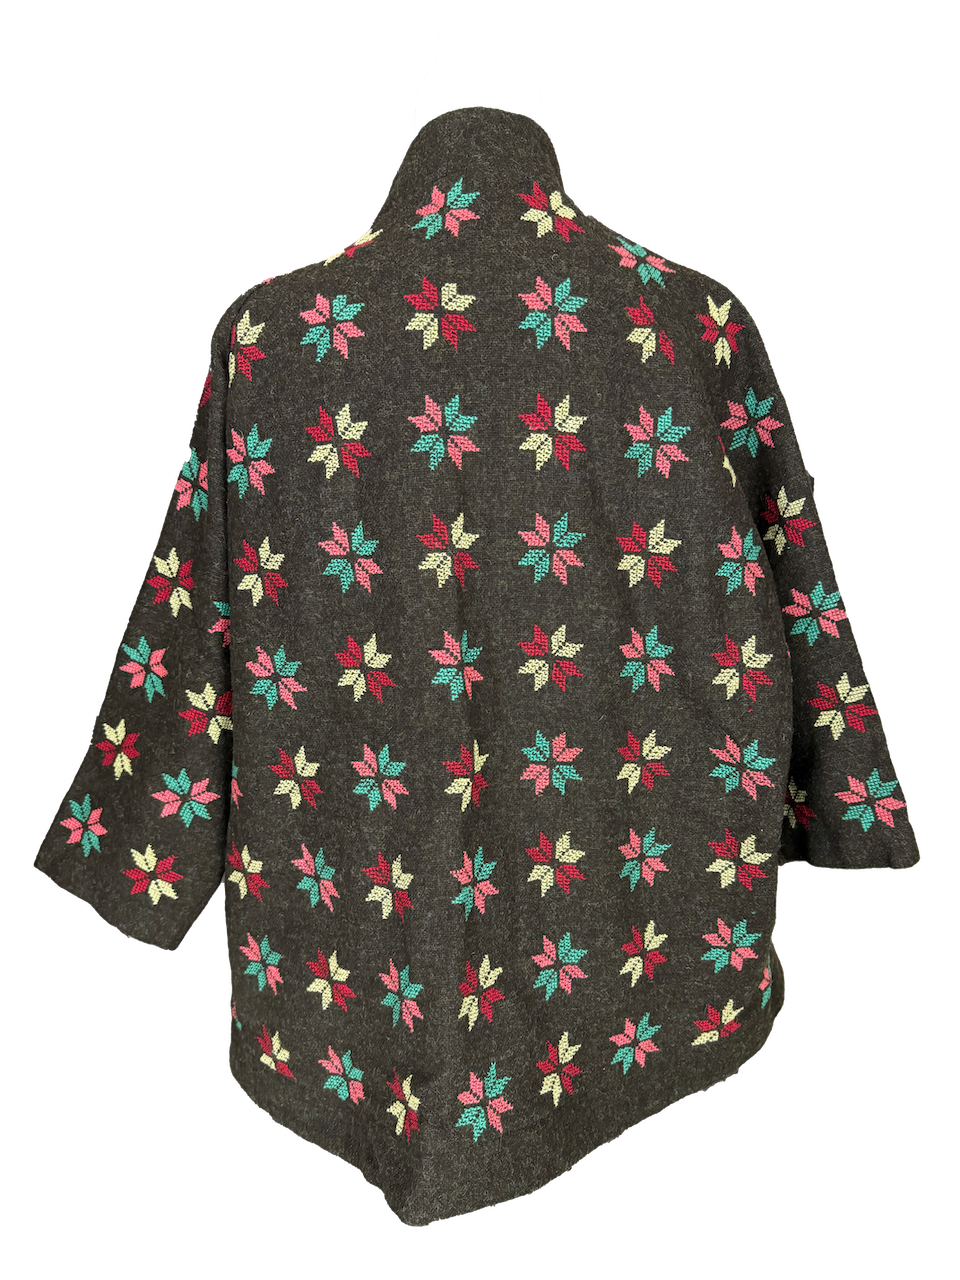 The Heavily Embroidered Round Jacket in Dark Brown With Colourful Star Embroidery